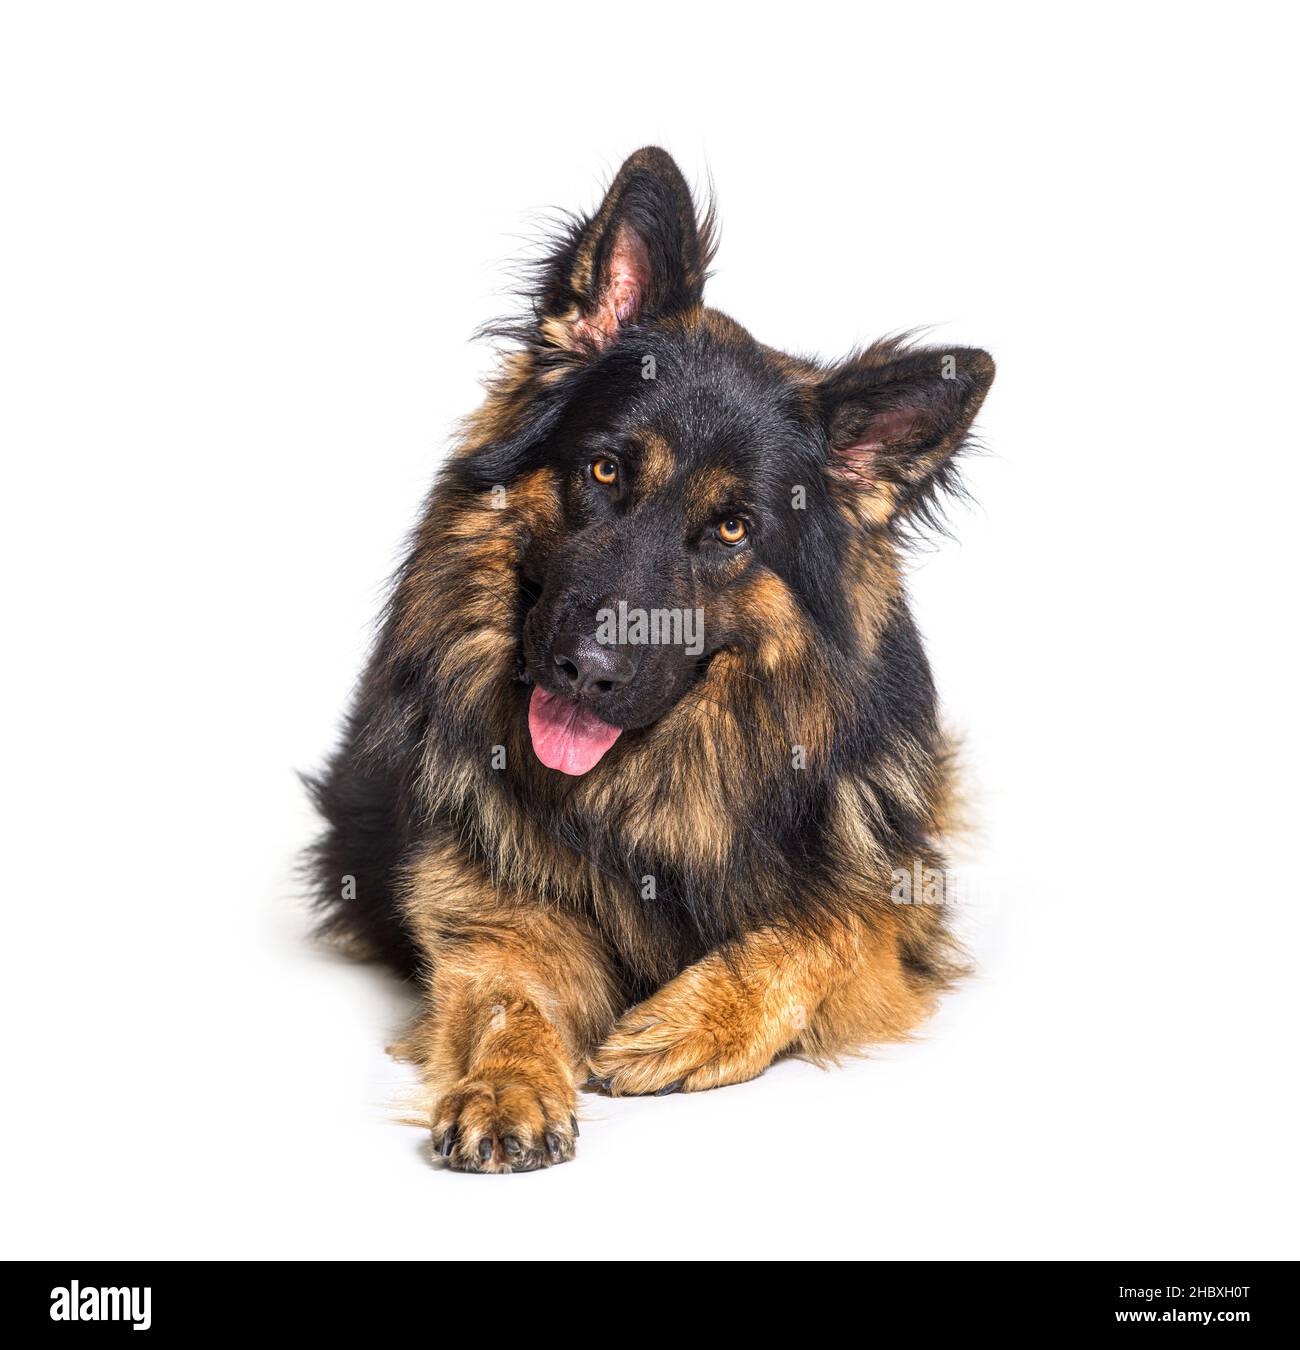 German shepherd long haired lying down, looking at camera, isolated on white Stock Photo